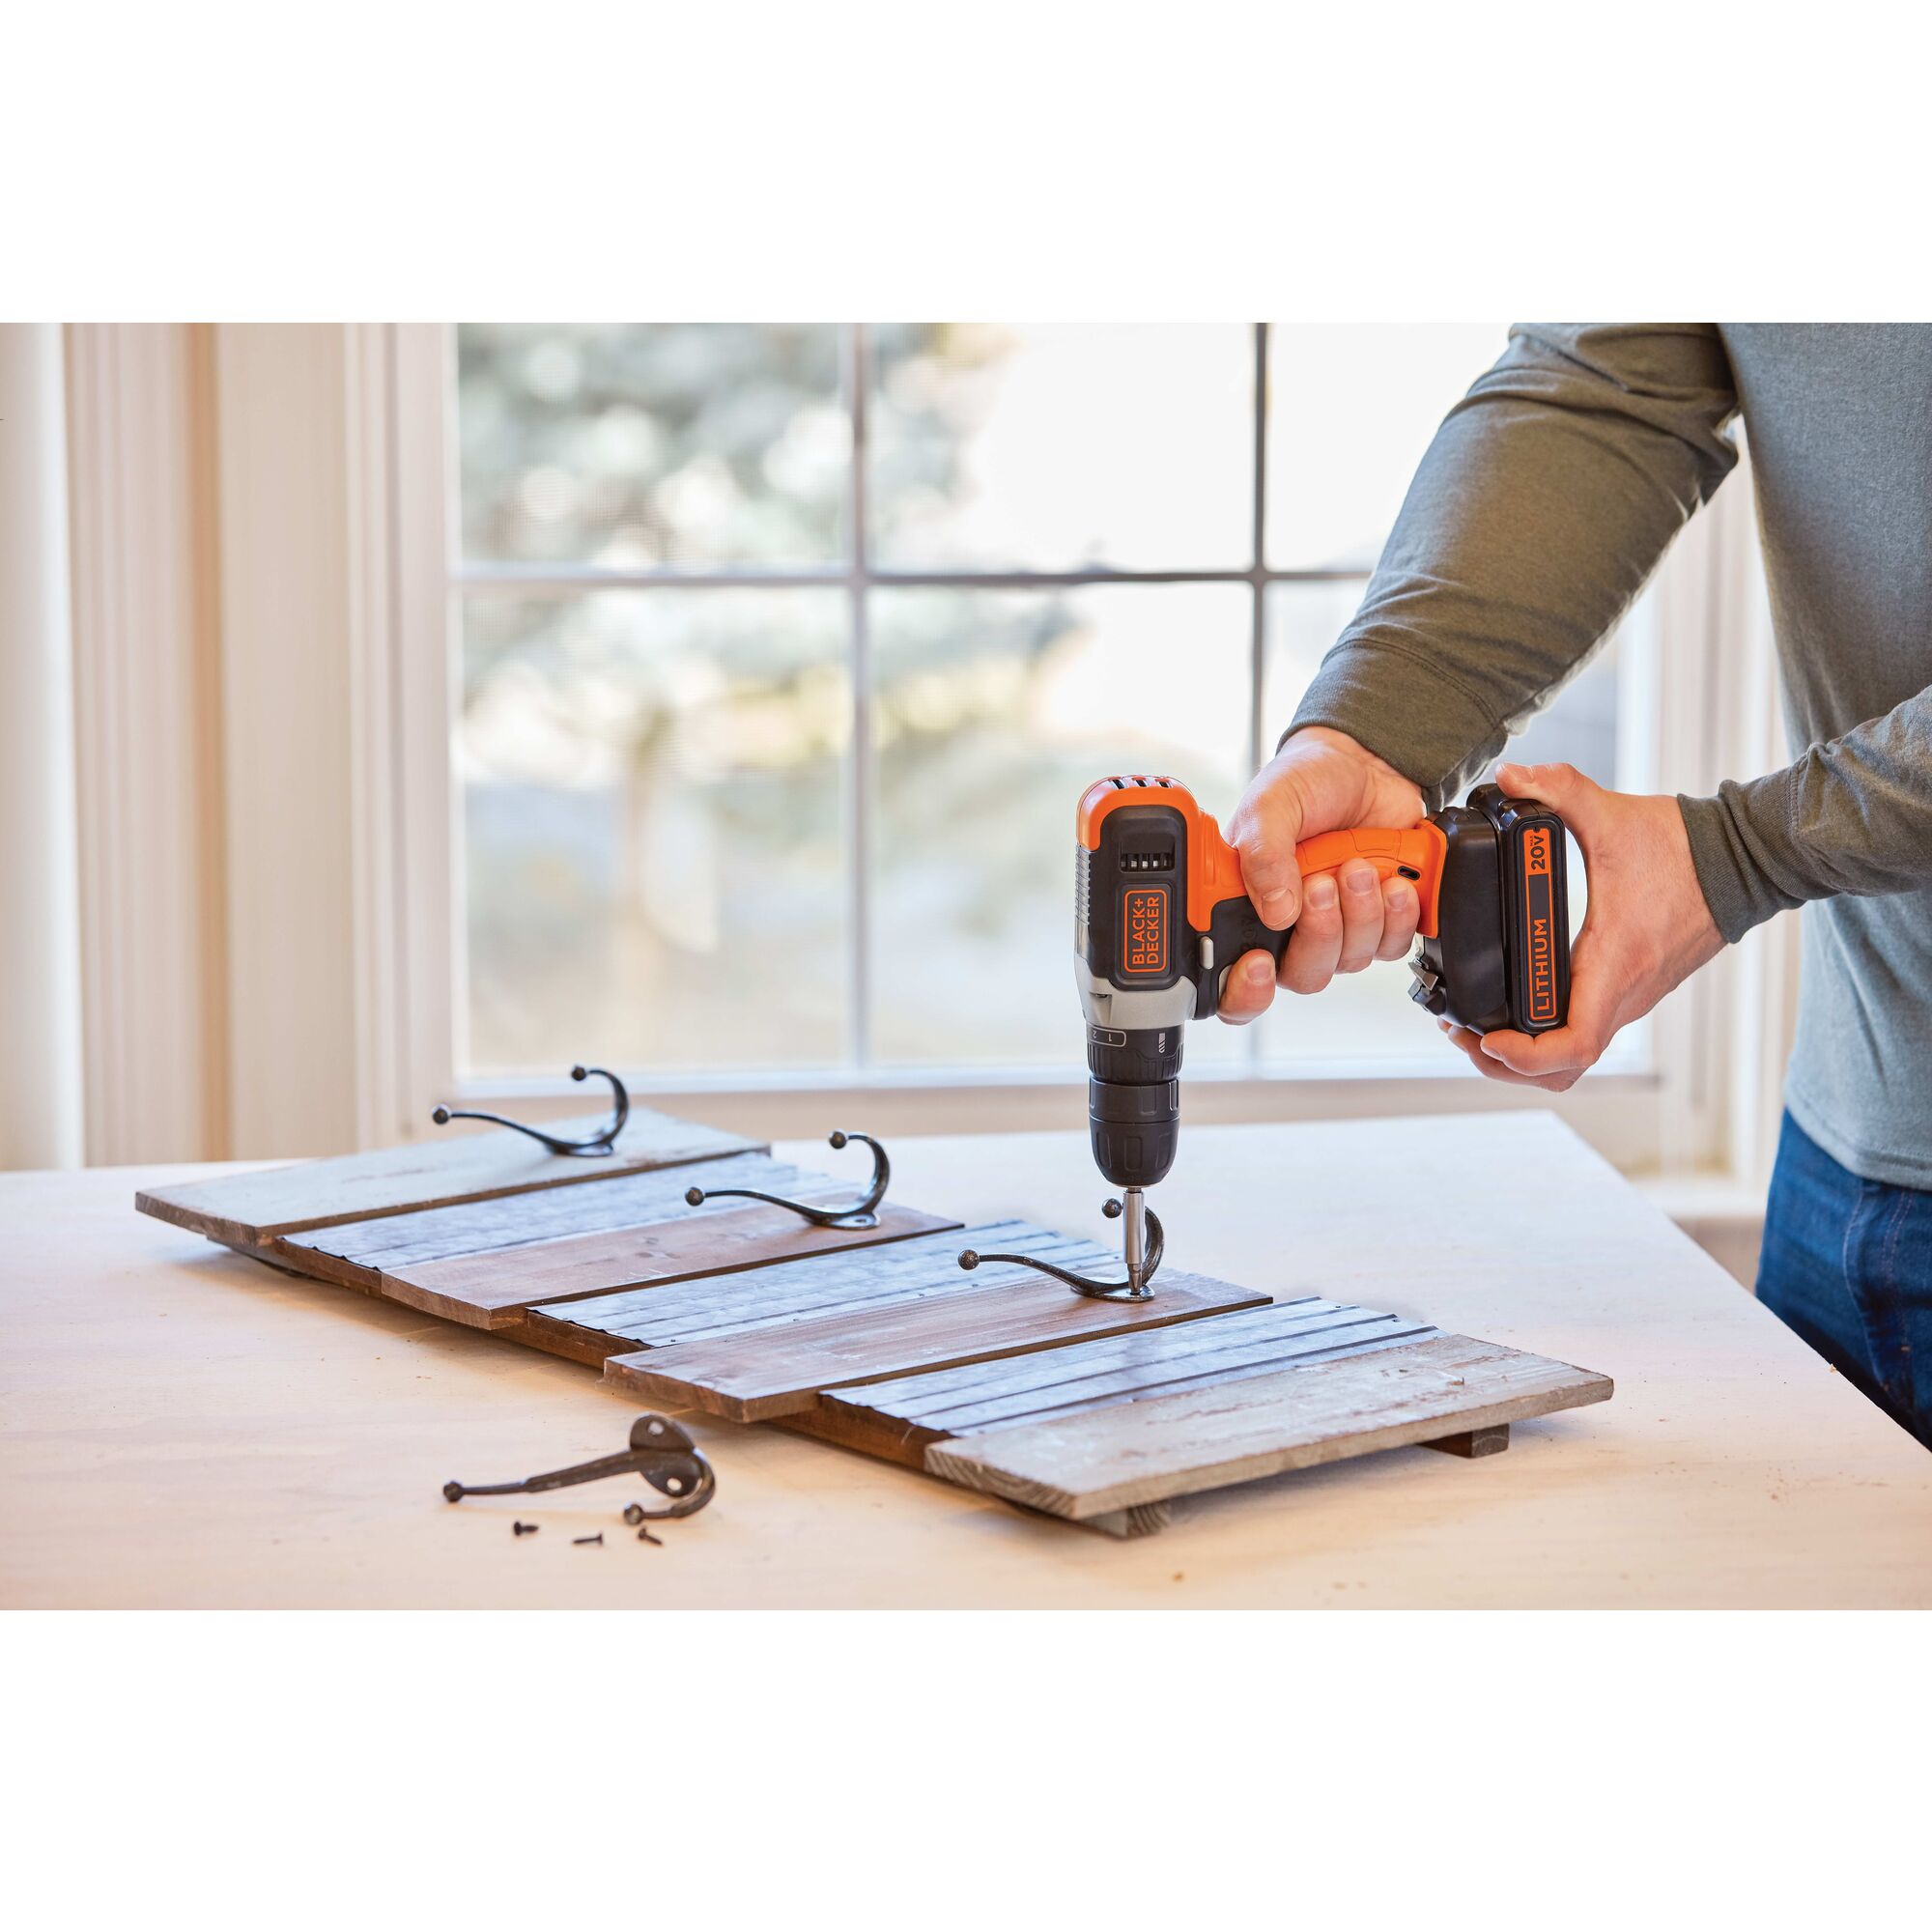 Person using handheld cordless drill on a table in a home